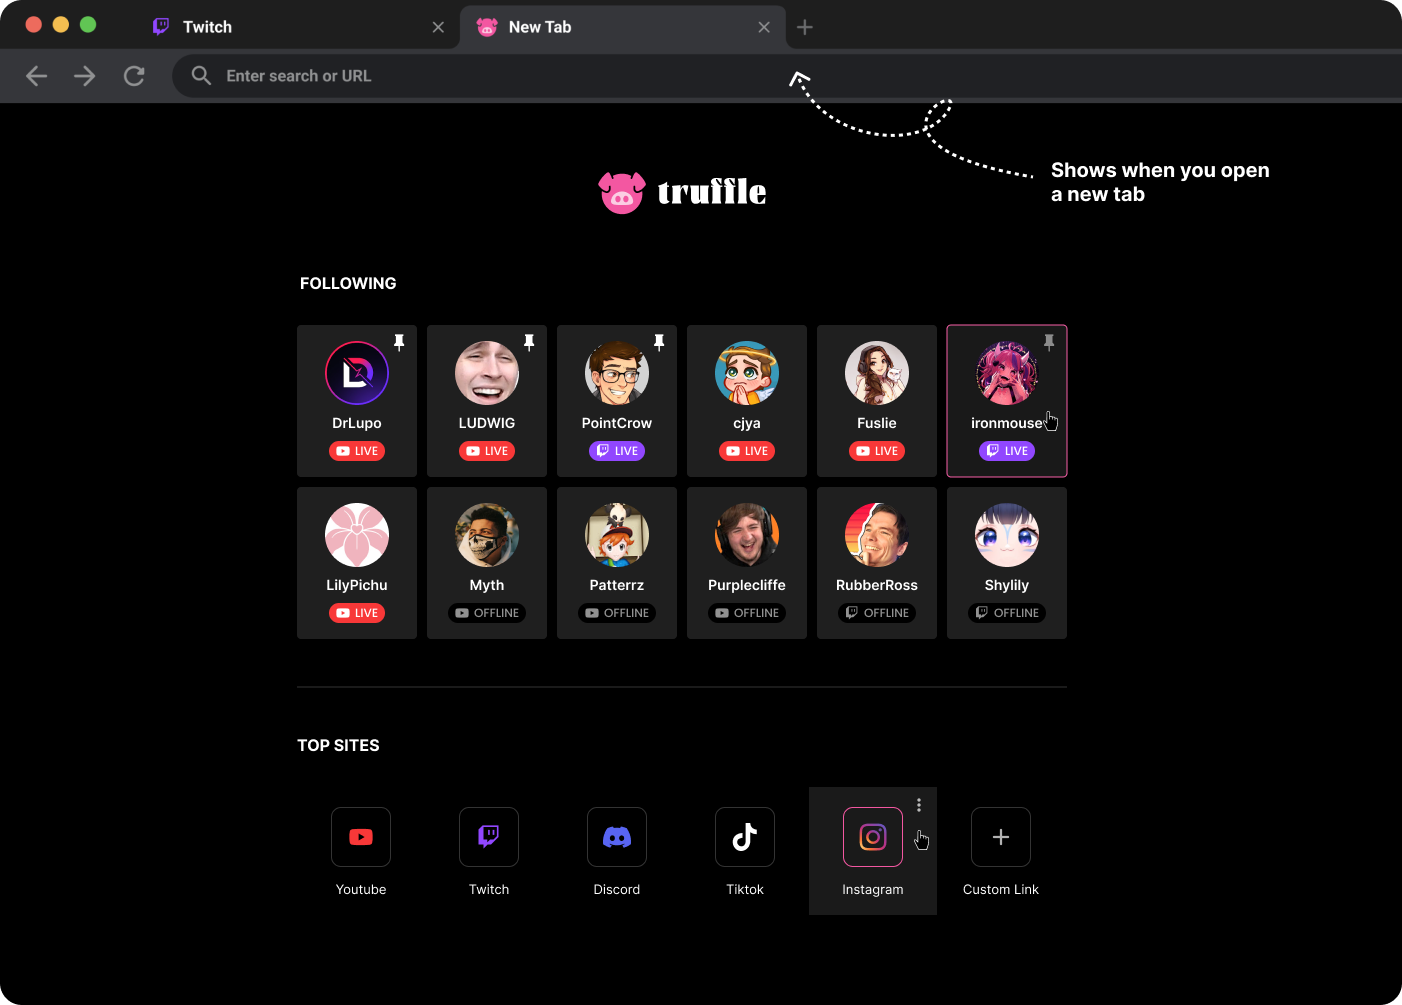 image of the new Tab page, mostly black with icons of the users followed streamers and their most viewed sites